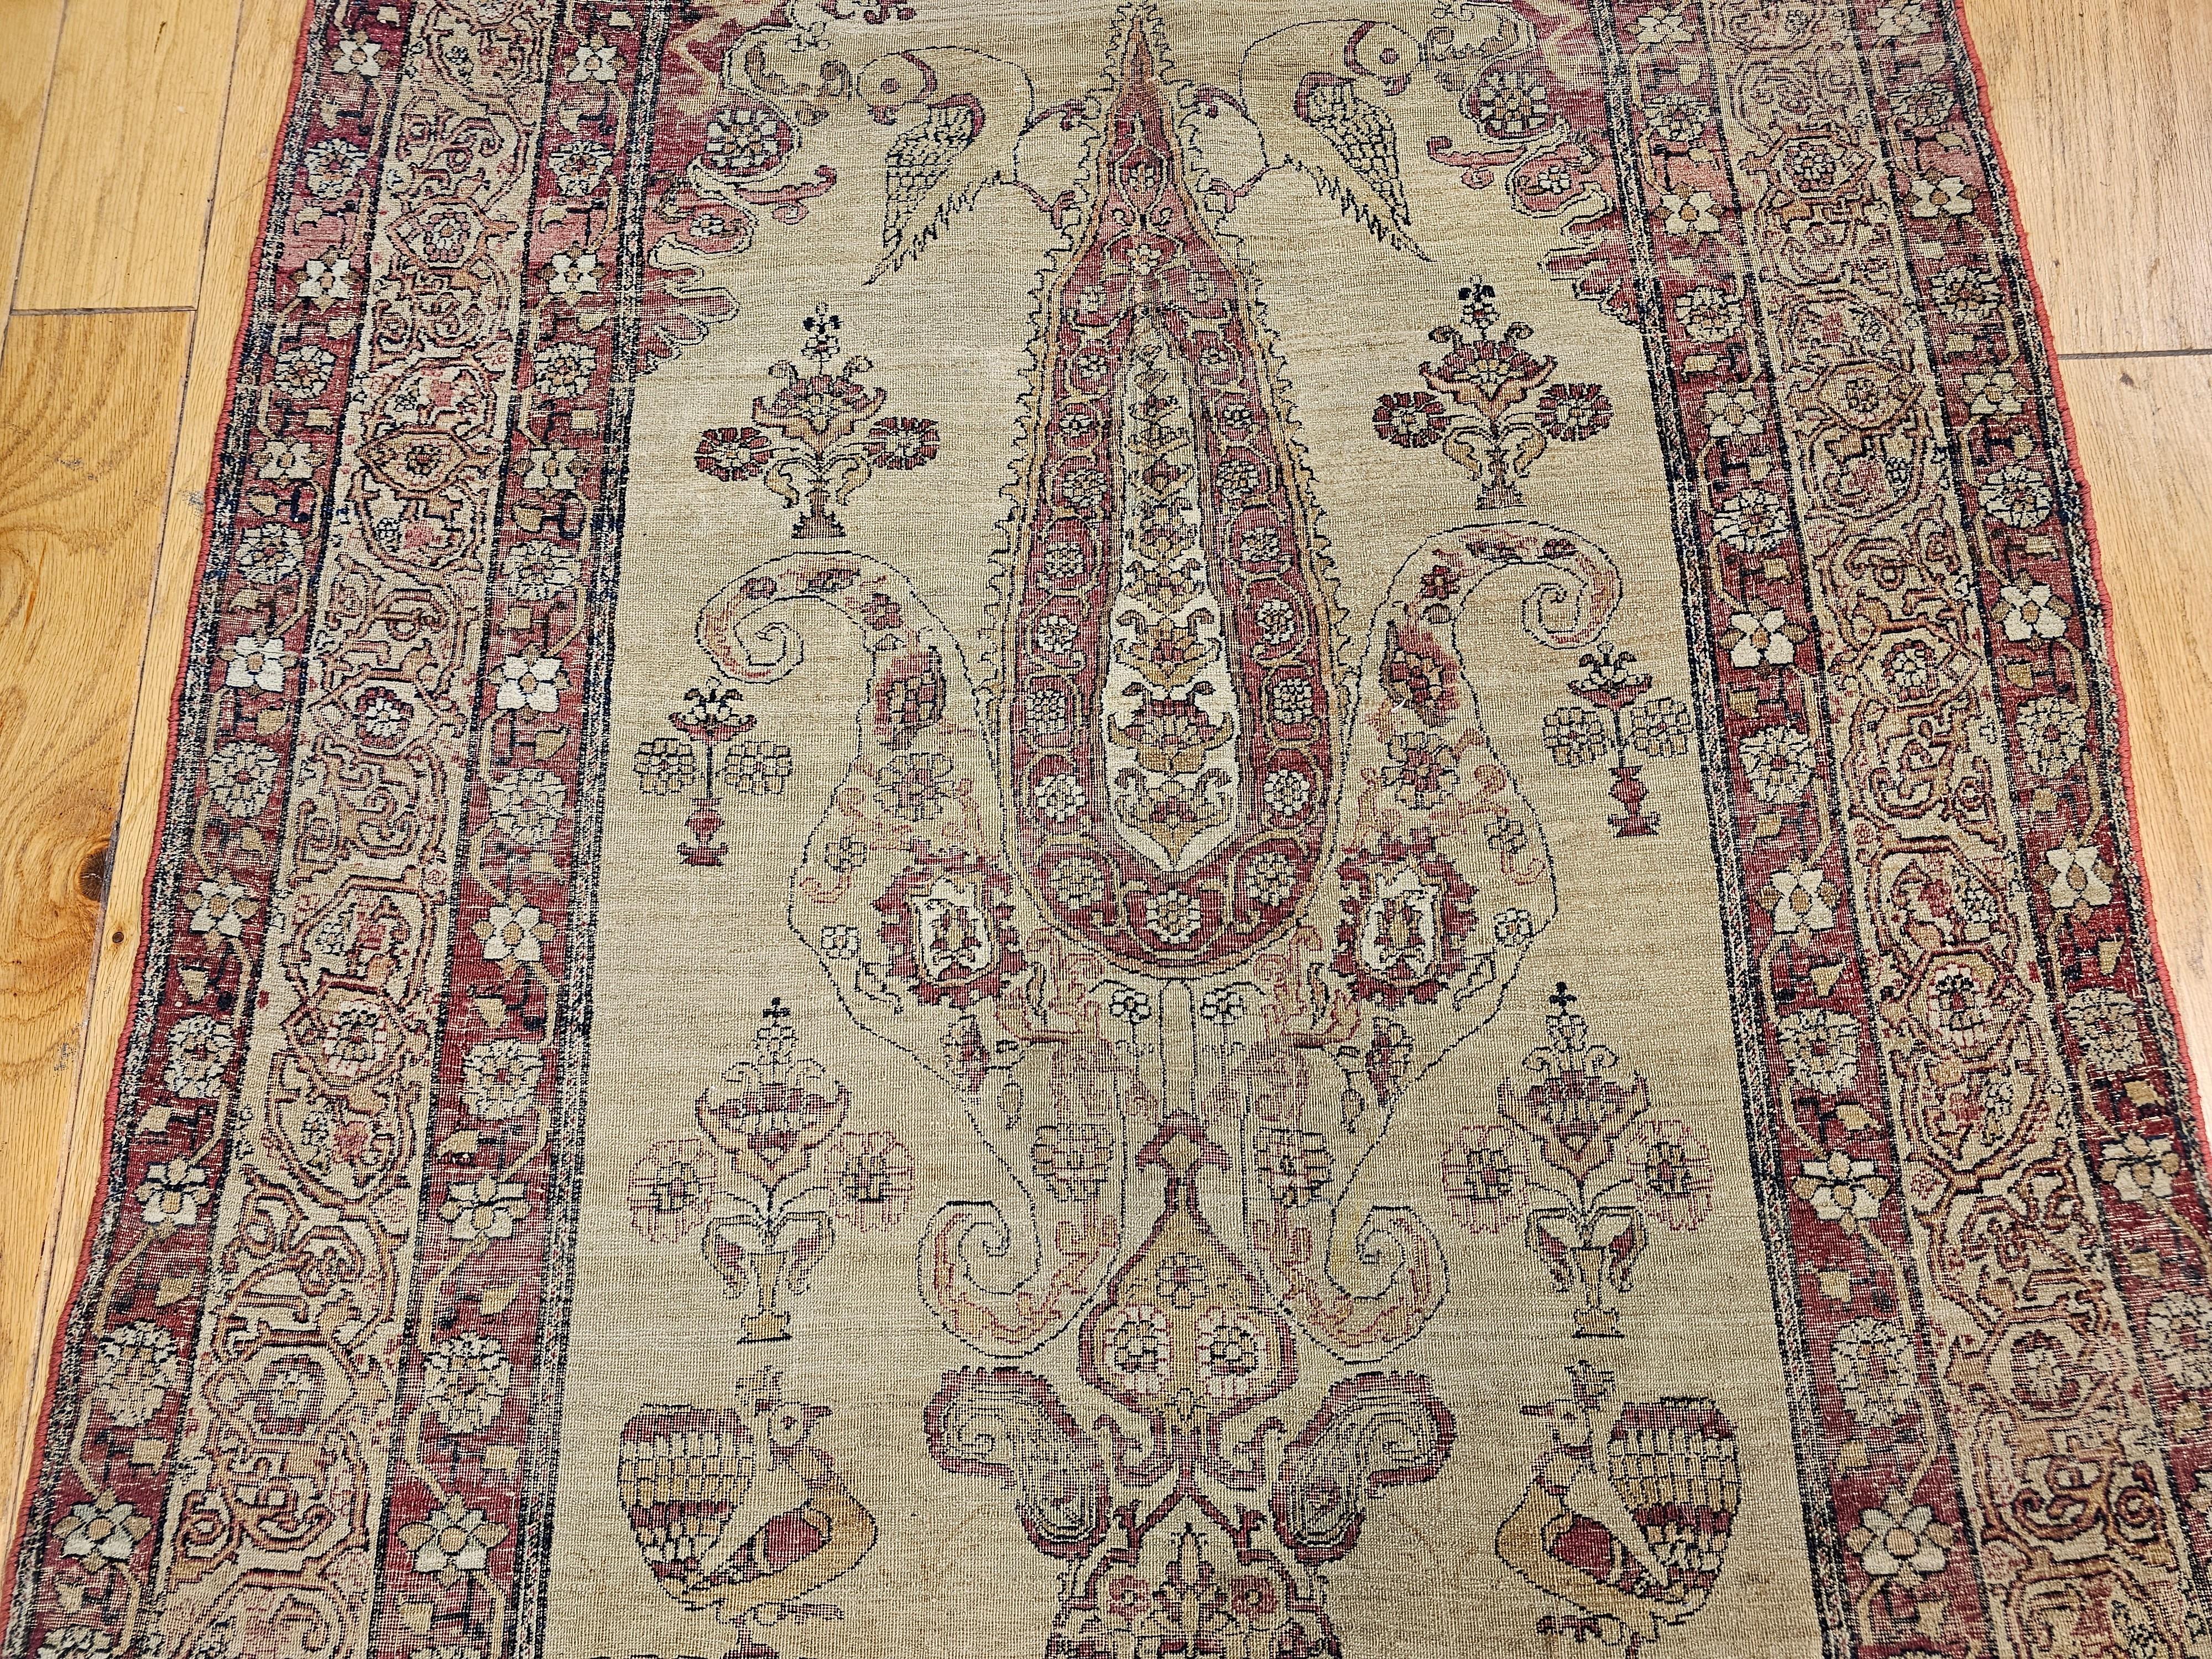 19th Century Persian Kerman Lavar Pictorial “Tree of Life” Rug in Camel, Red For Sale 5